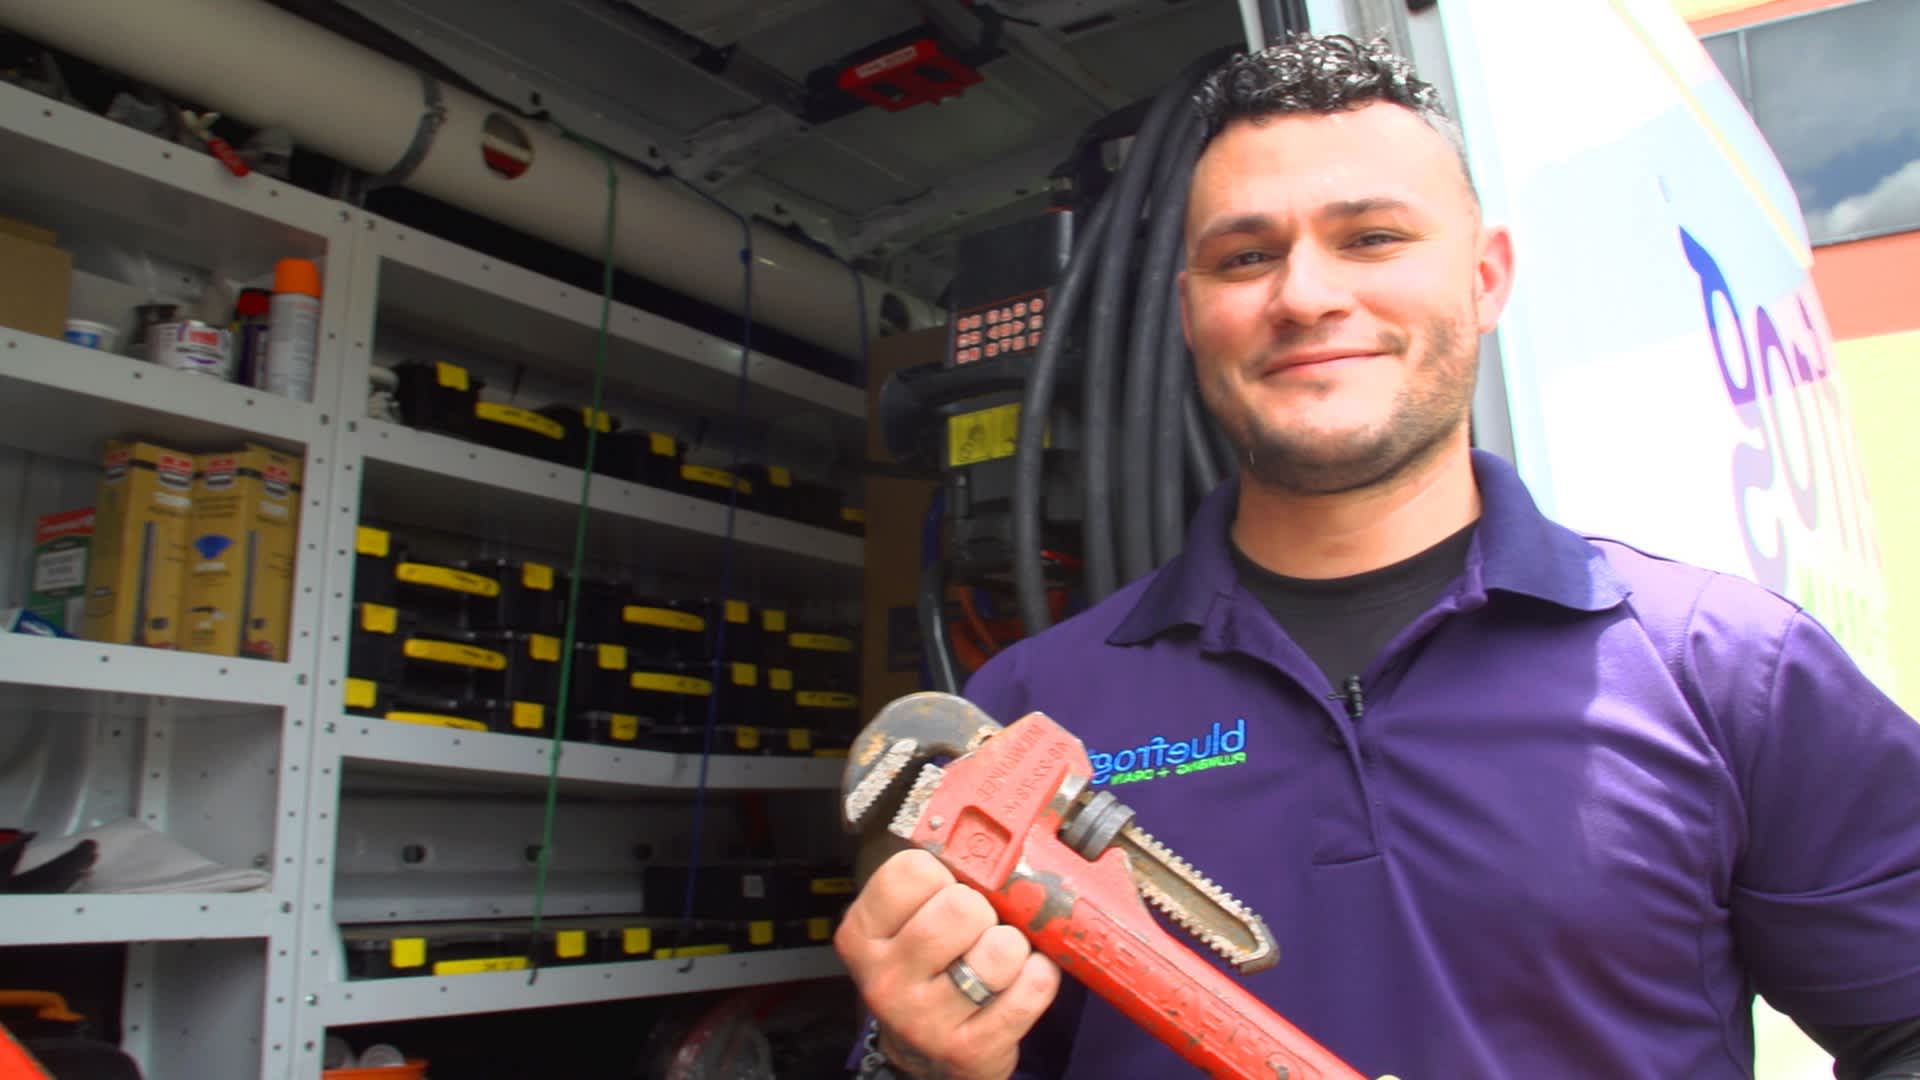 What it takes to earn $105,000 per year as a plumber ... - CNBC